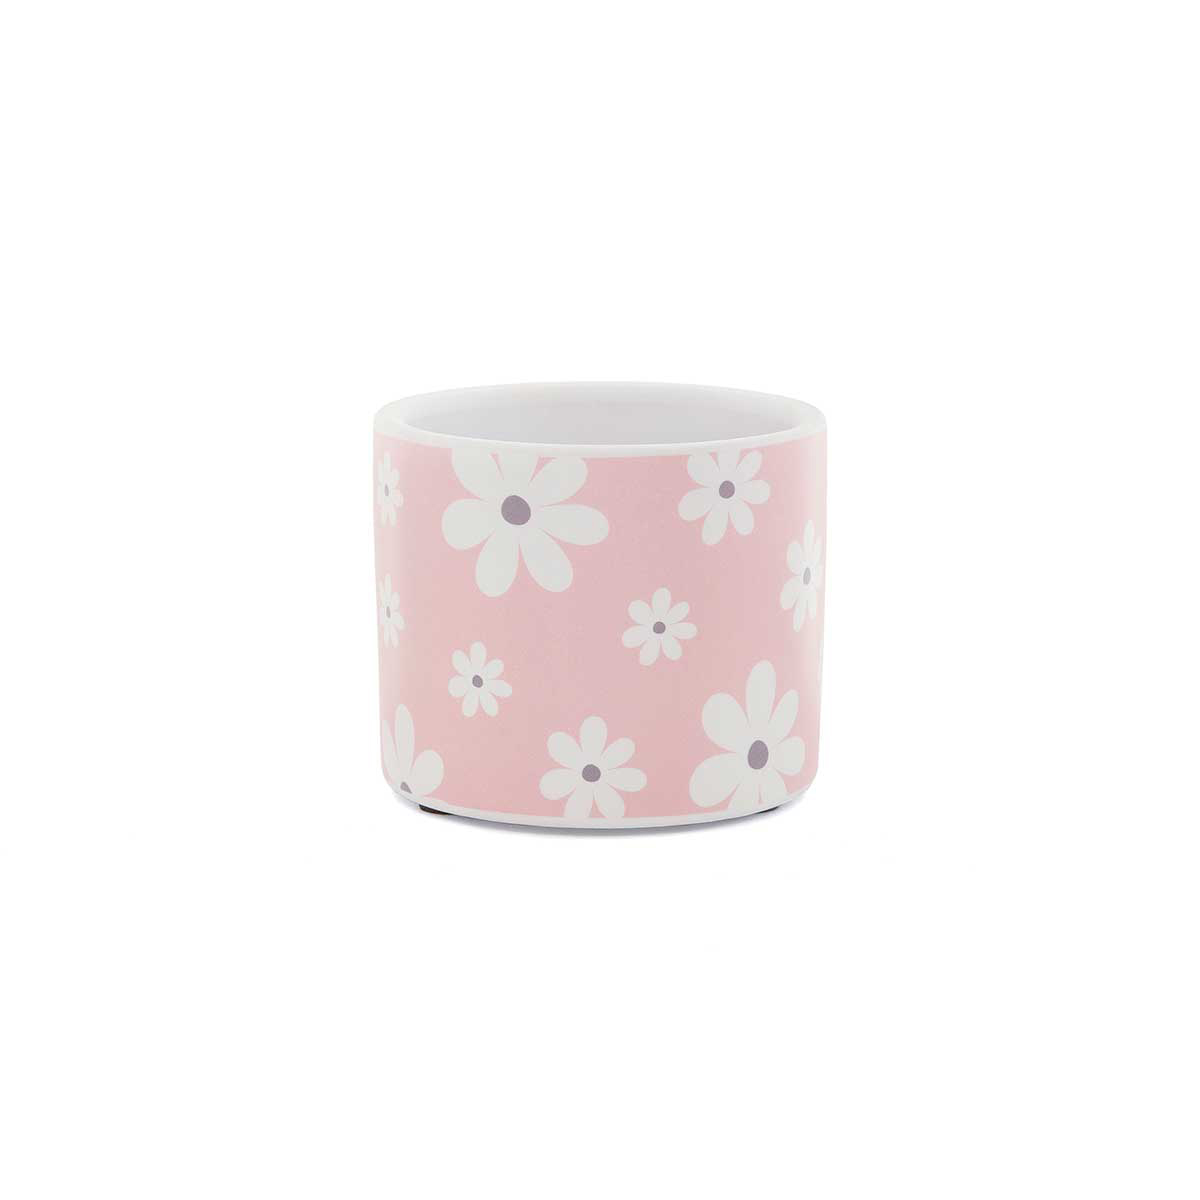 WHOOPSIE DAISY CERAMIC POT PINK/WHITE SMALL 3"X2.5"